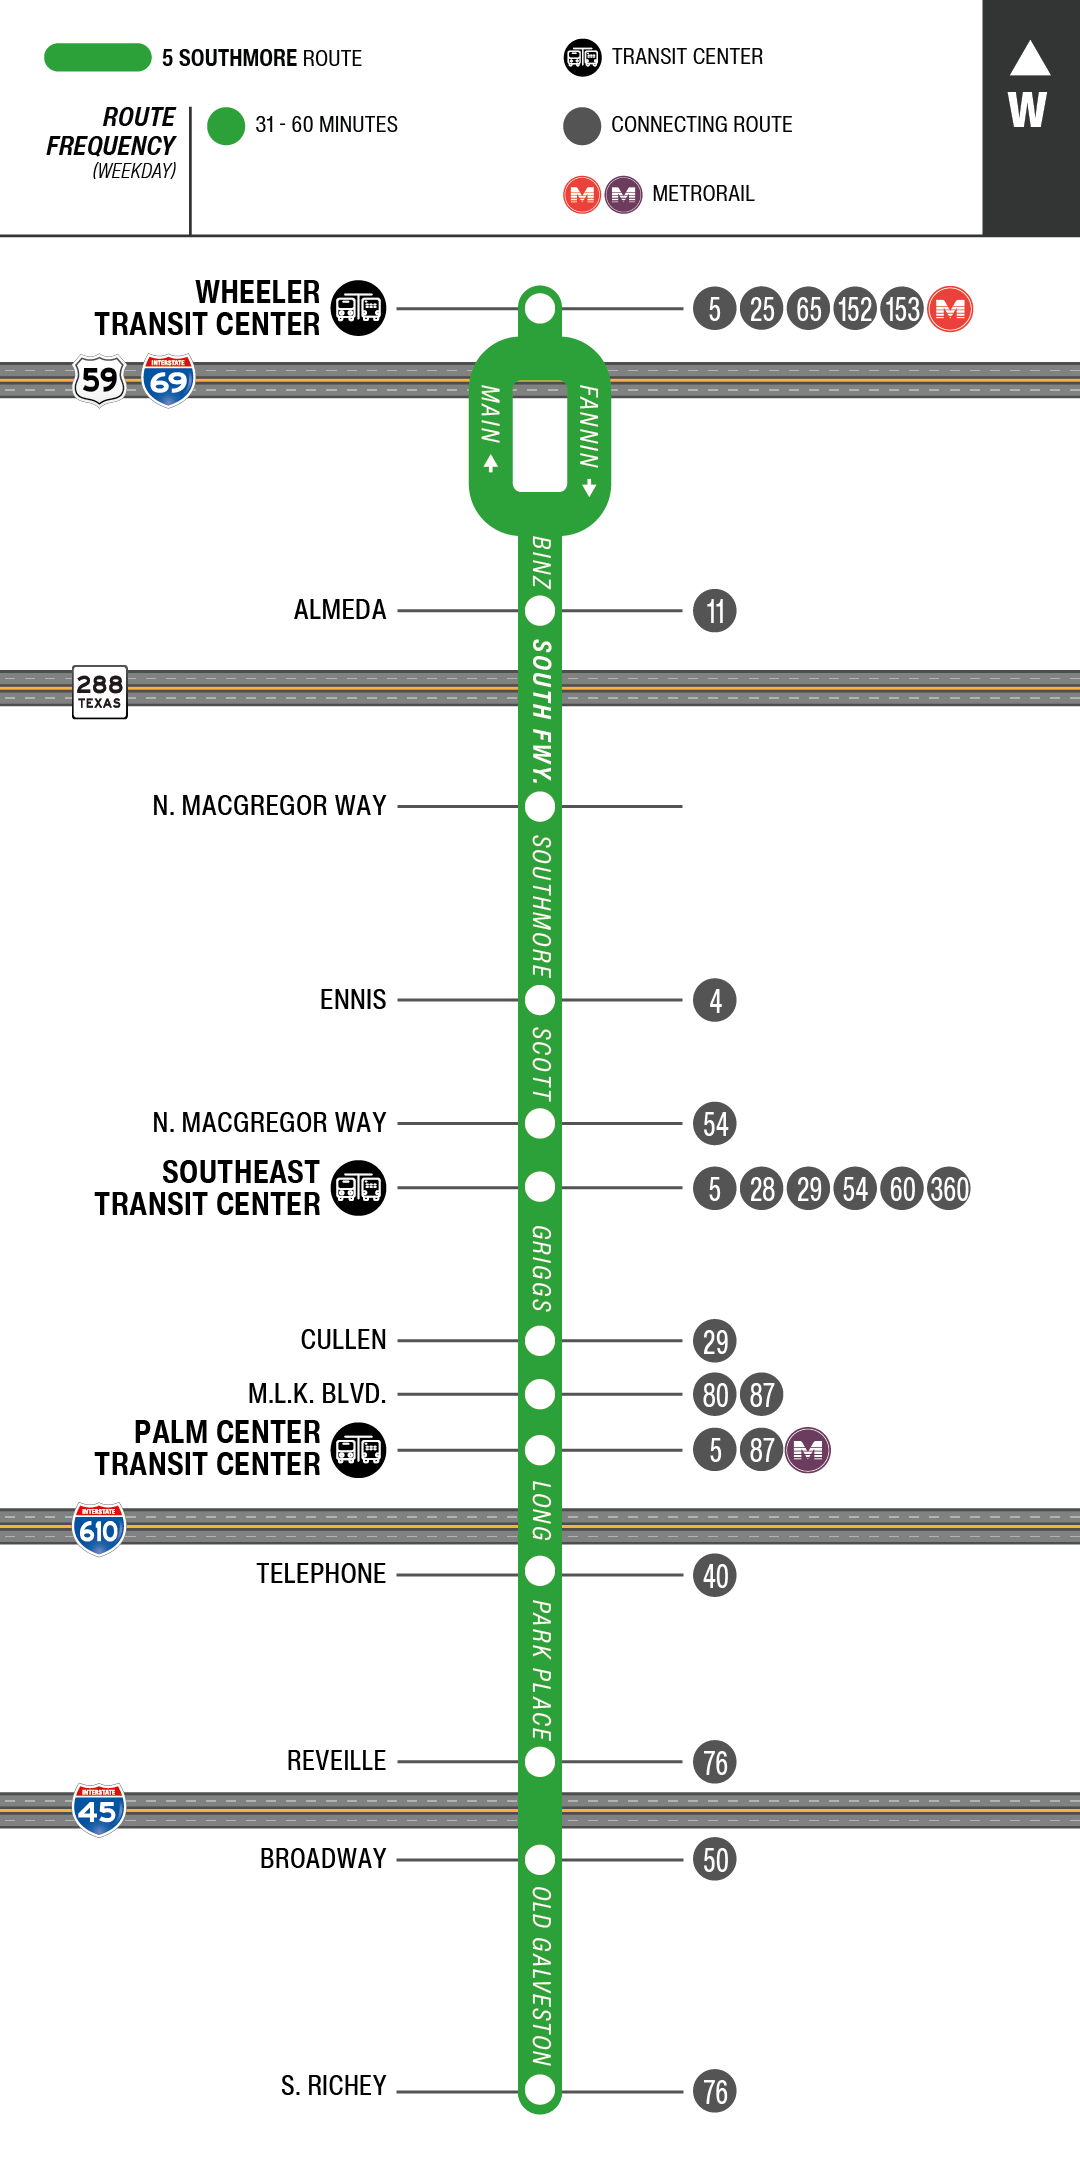 Route map for 5 Southmore bus